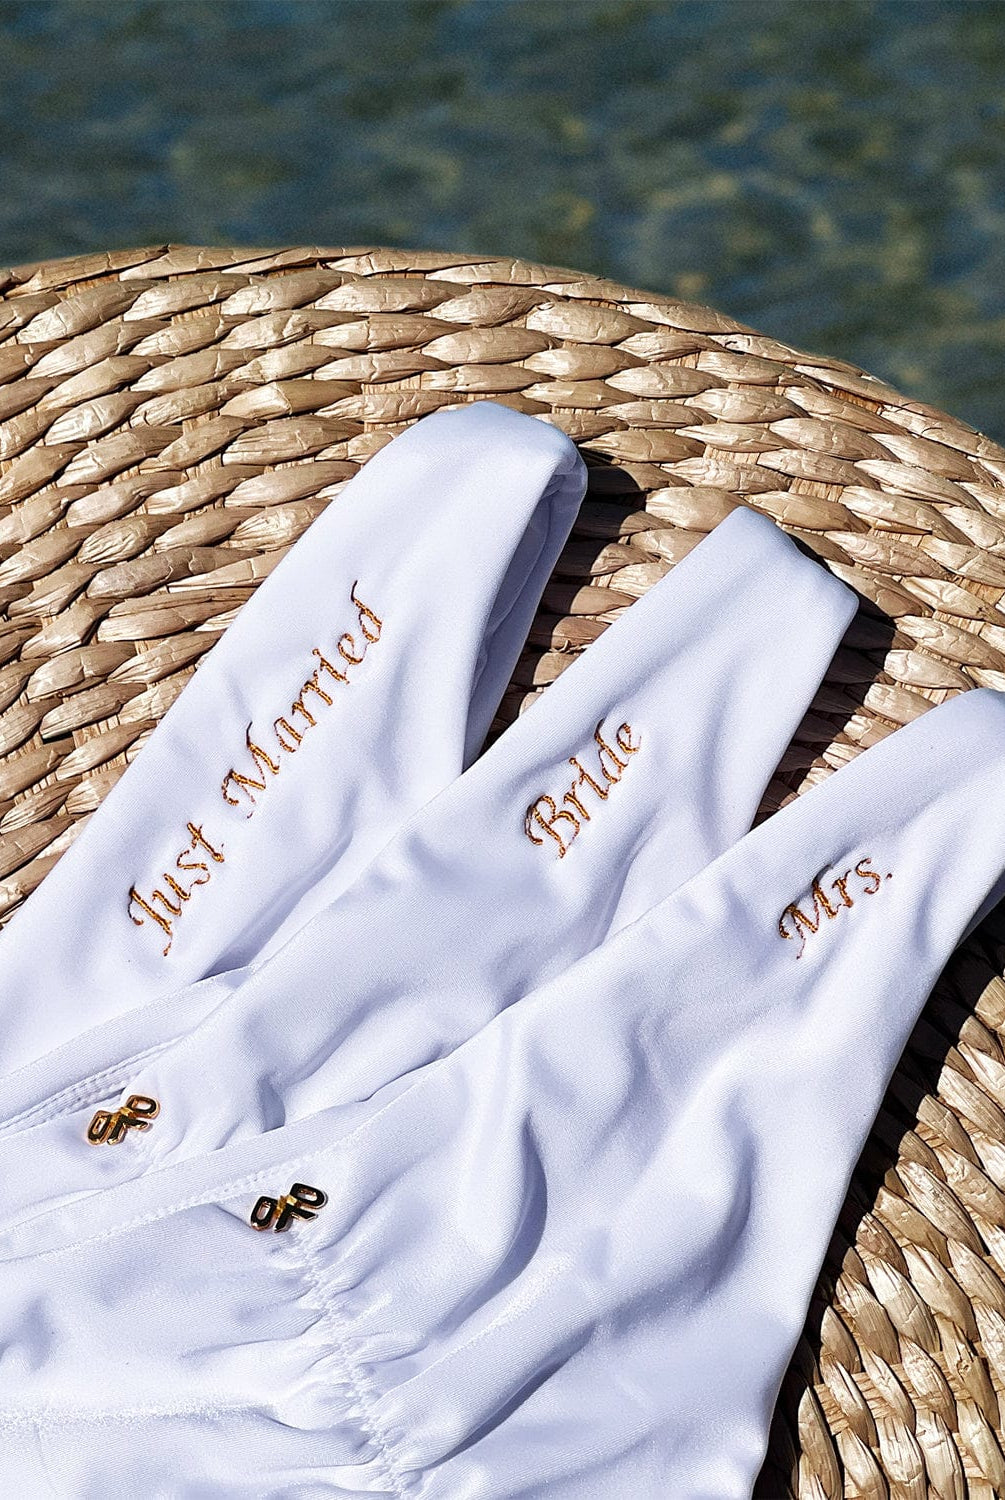 Three white bikini bottoms with gold embroidering laying flat on a wicker basket near the water.